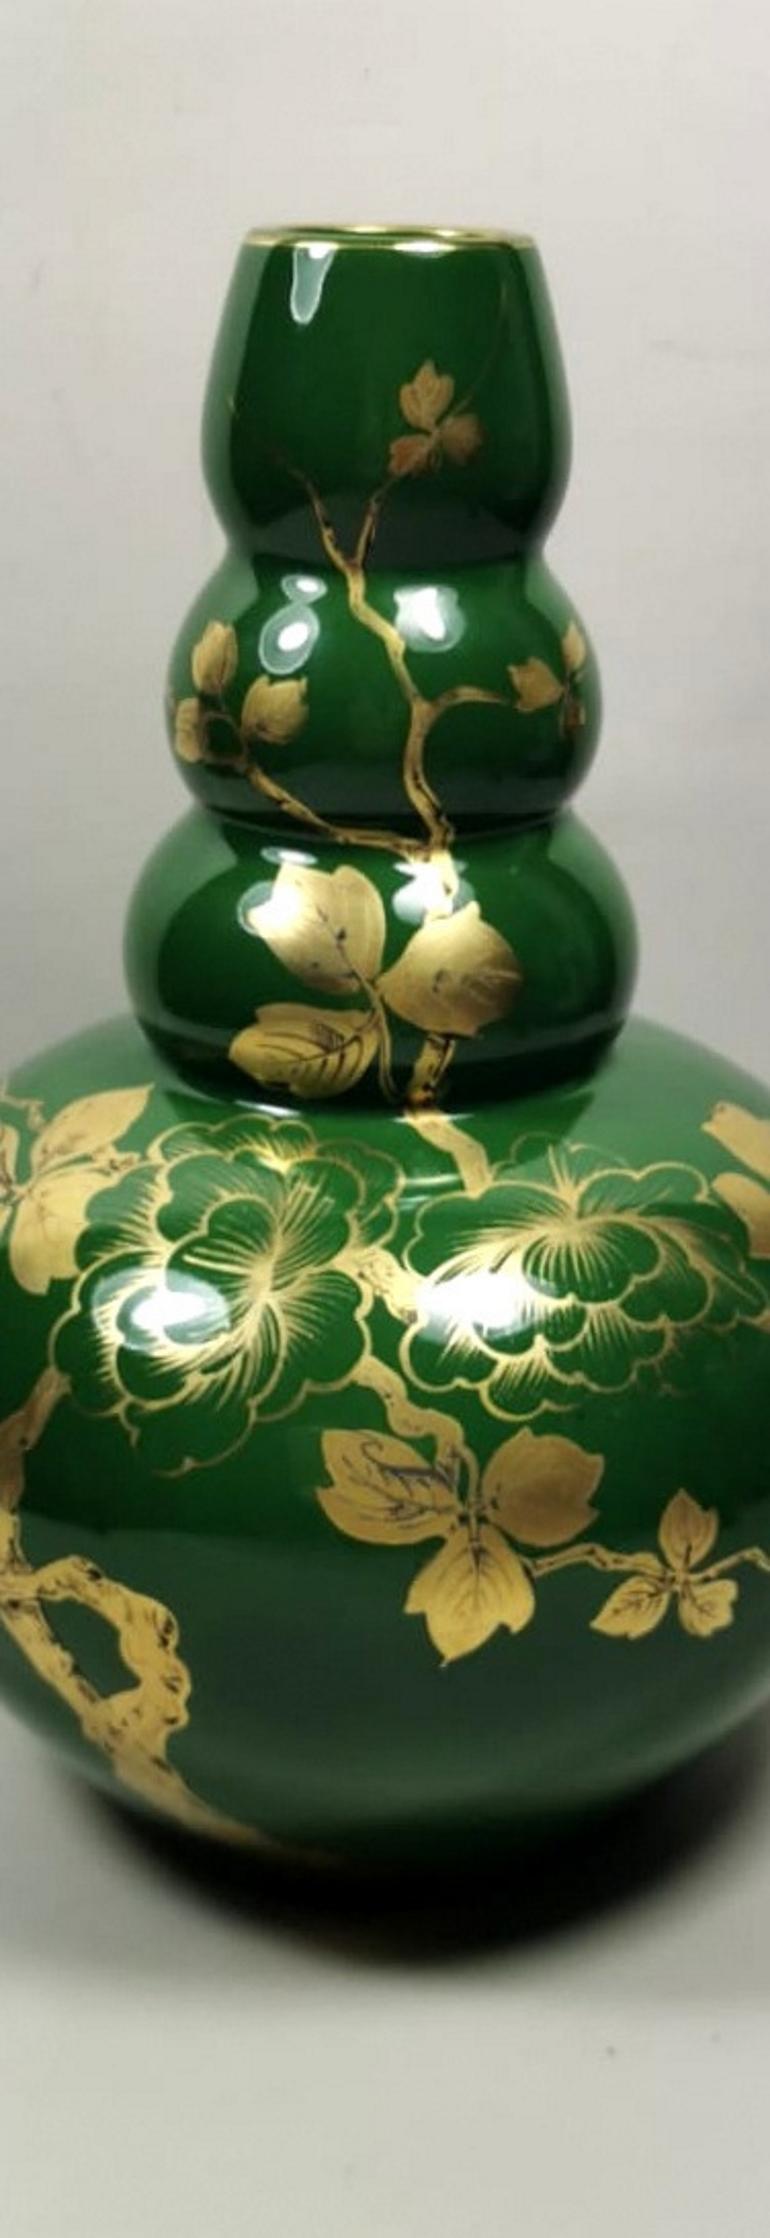 Art Decò Green Enameled Terracotta Vase with Pure Gold Decorations, France In Good Condition For Sale In Prato, Tuscany